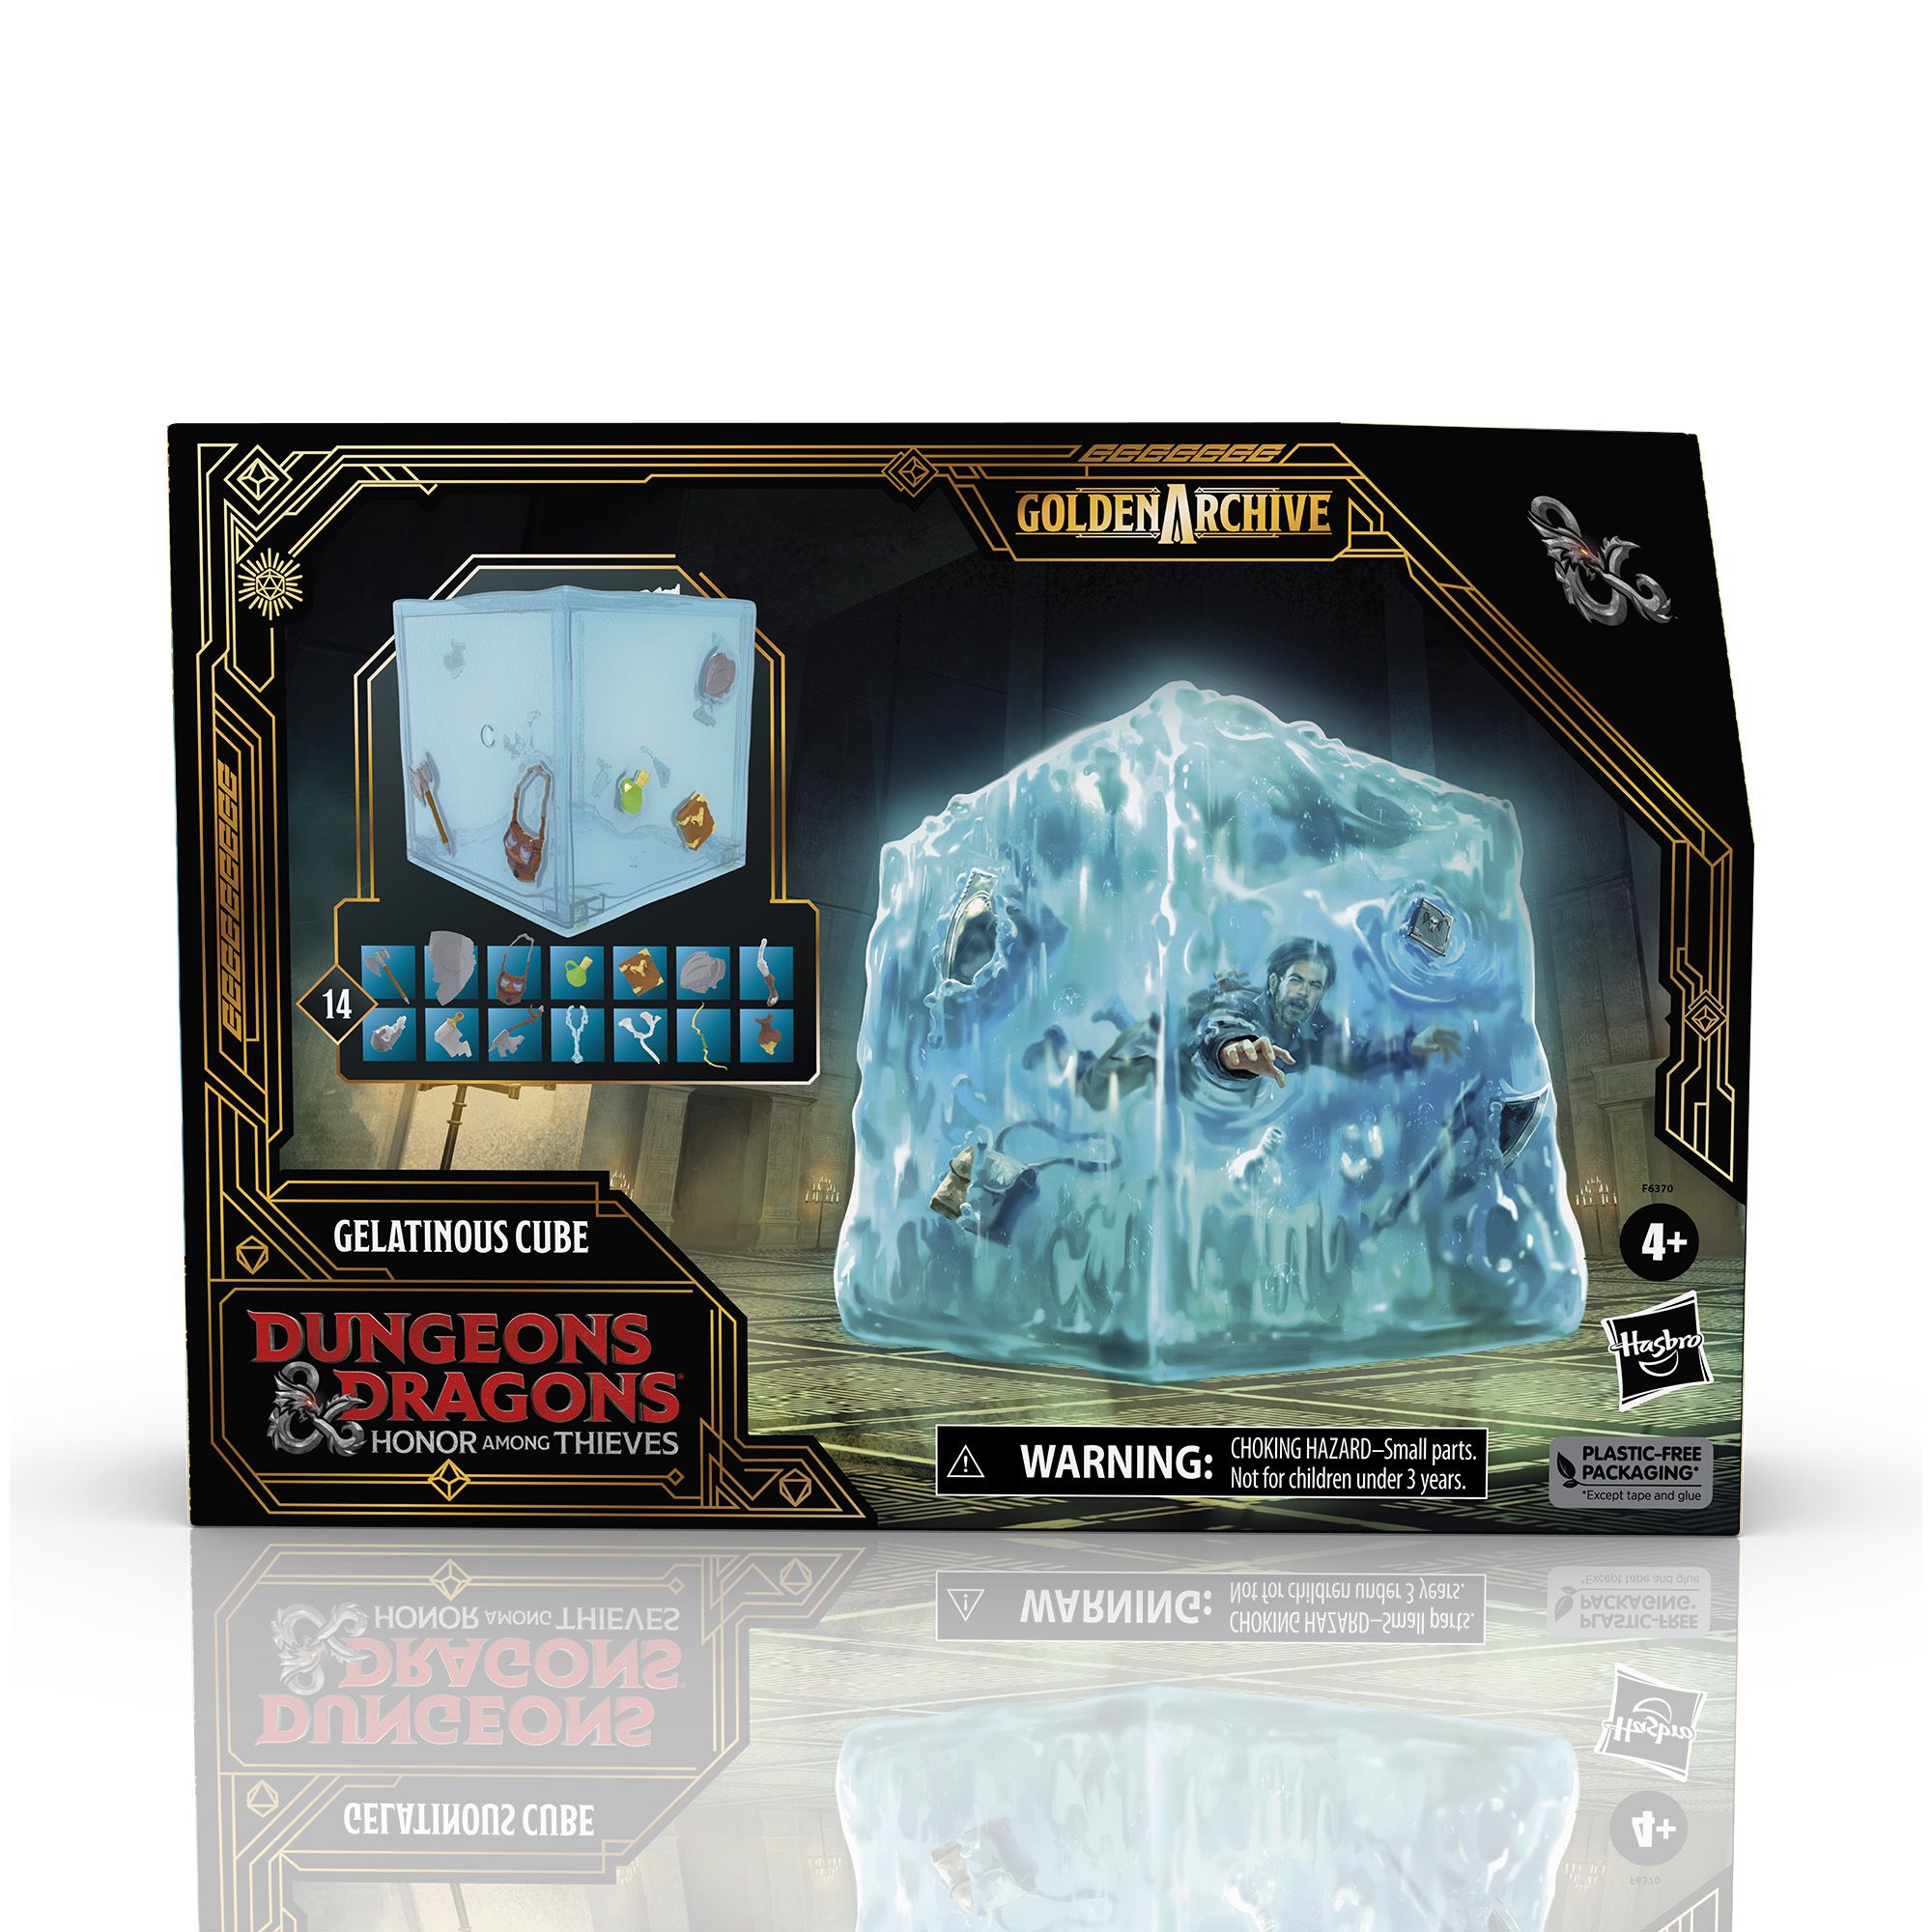 Dungeons and Dragons Golden Archive Gelatinous Cube Hasbro In Pack